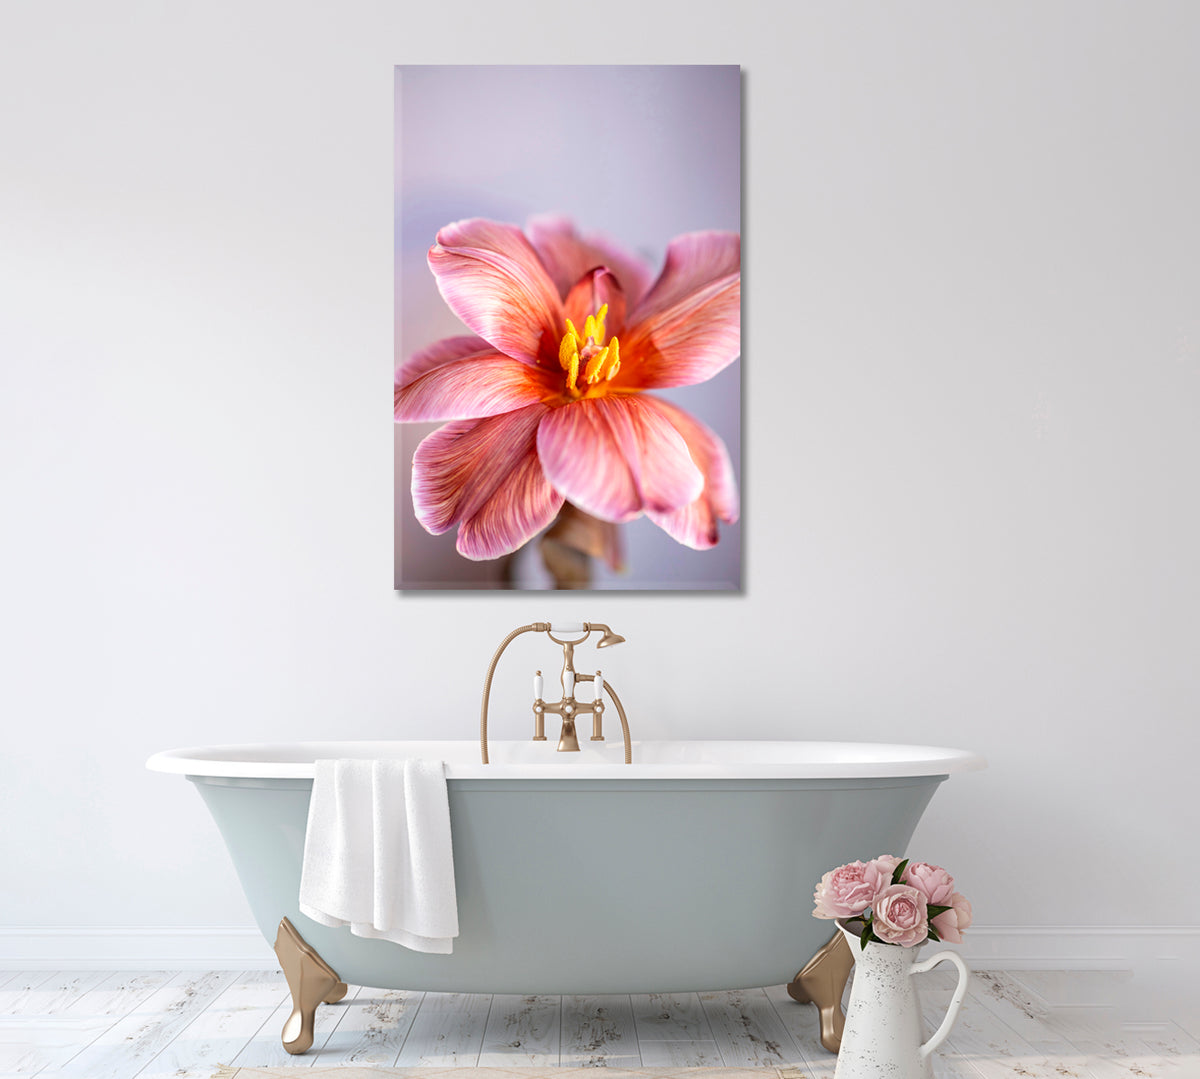 Tender Blooming Tulip Canvas Print ArtLexy 1 Panel 16"x24" inches 